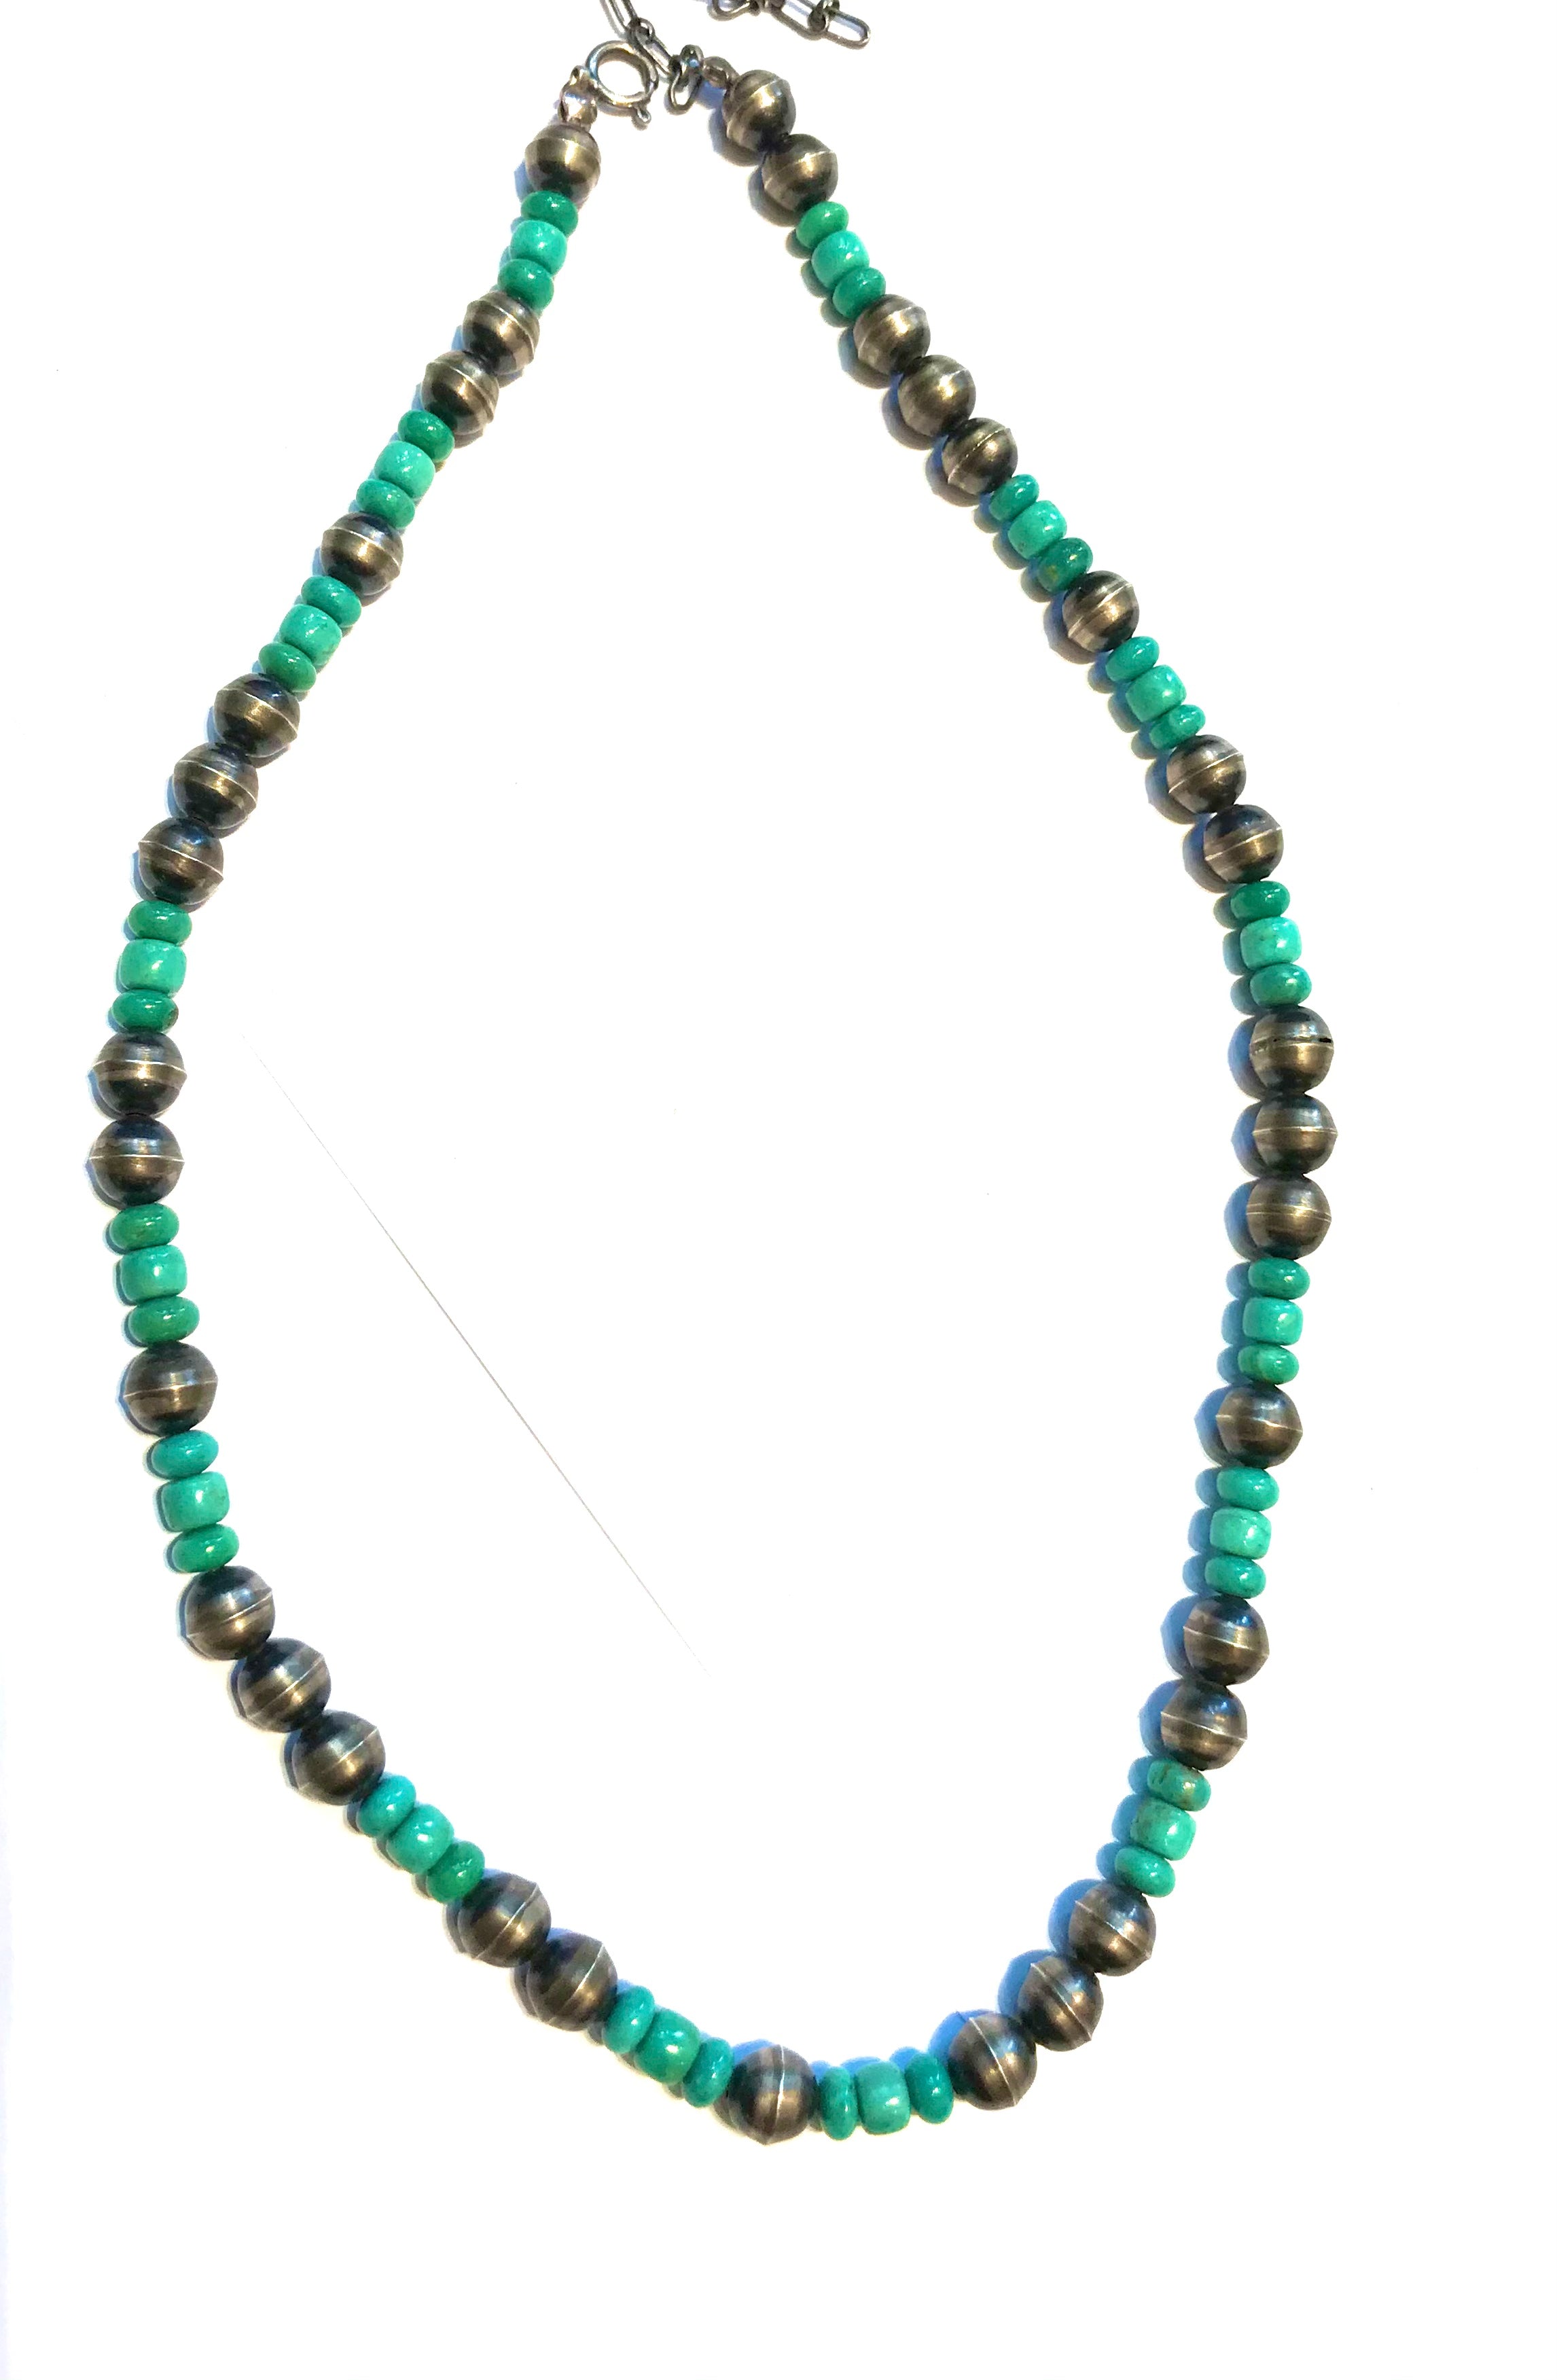 Navajo hand made turquoise bead necklace 16 inch